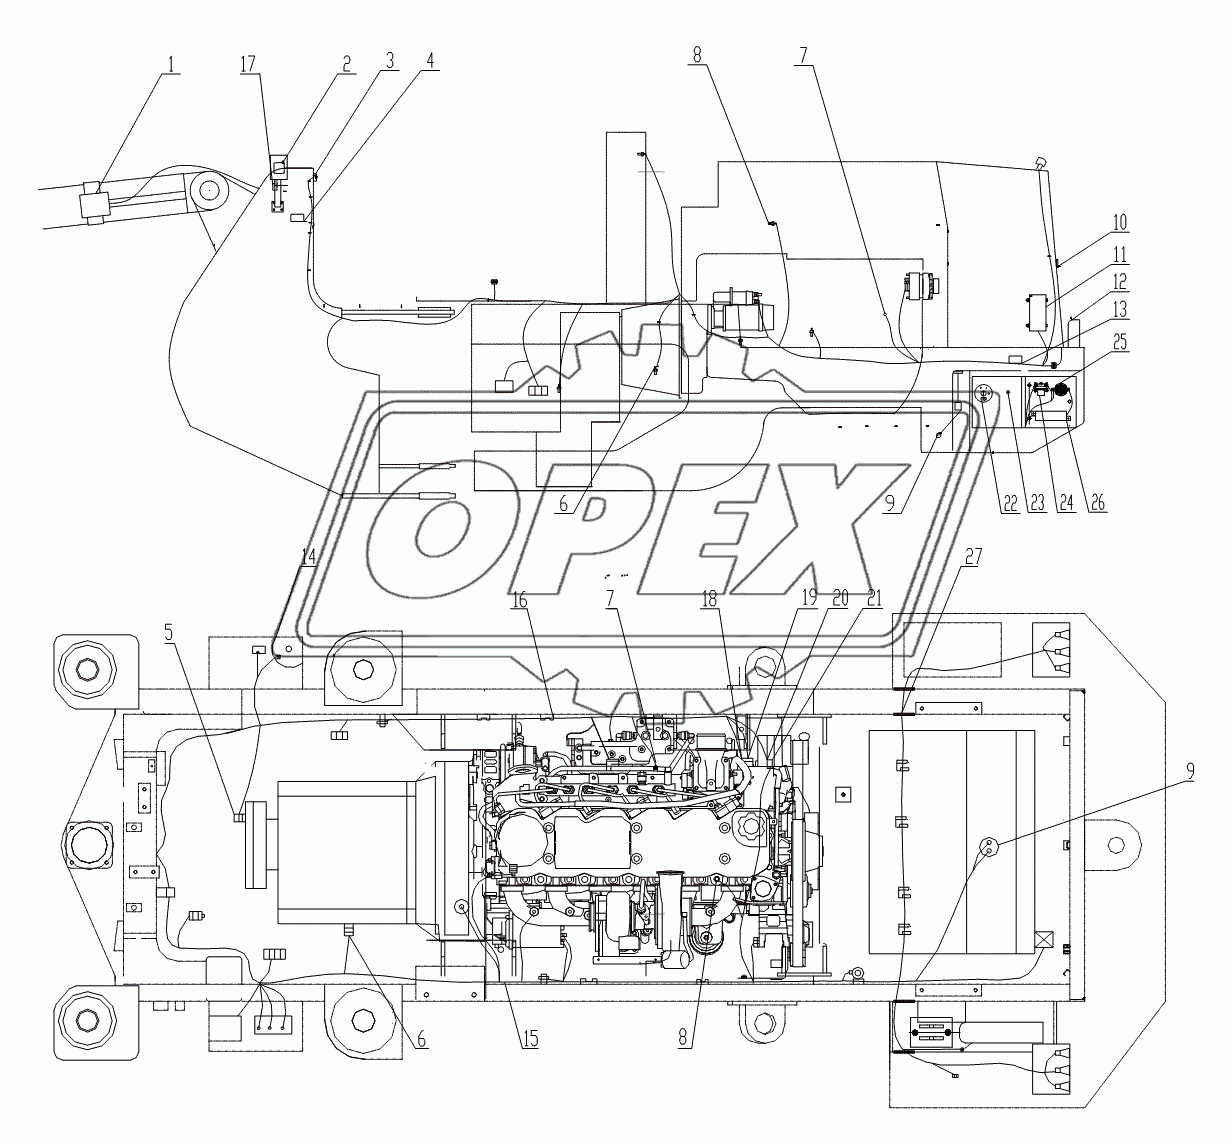 Electrical Component, chassis Wiring